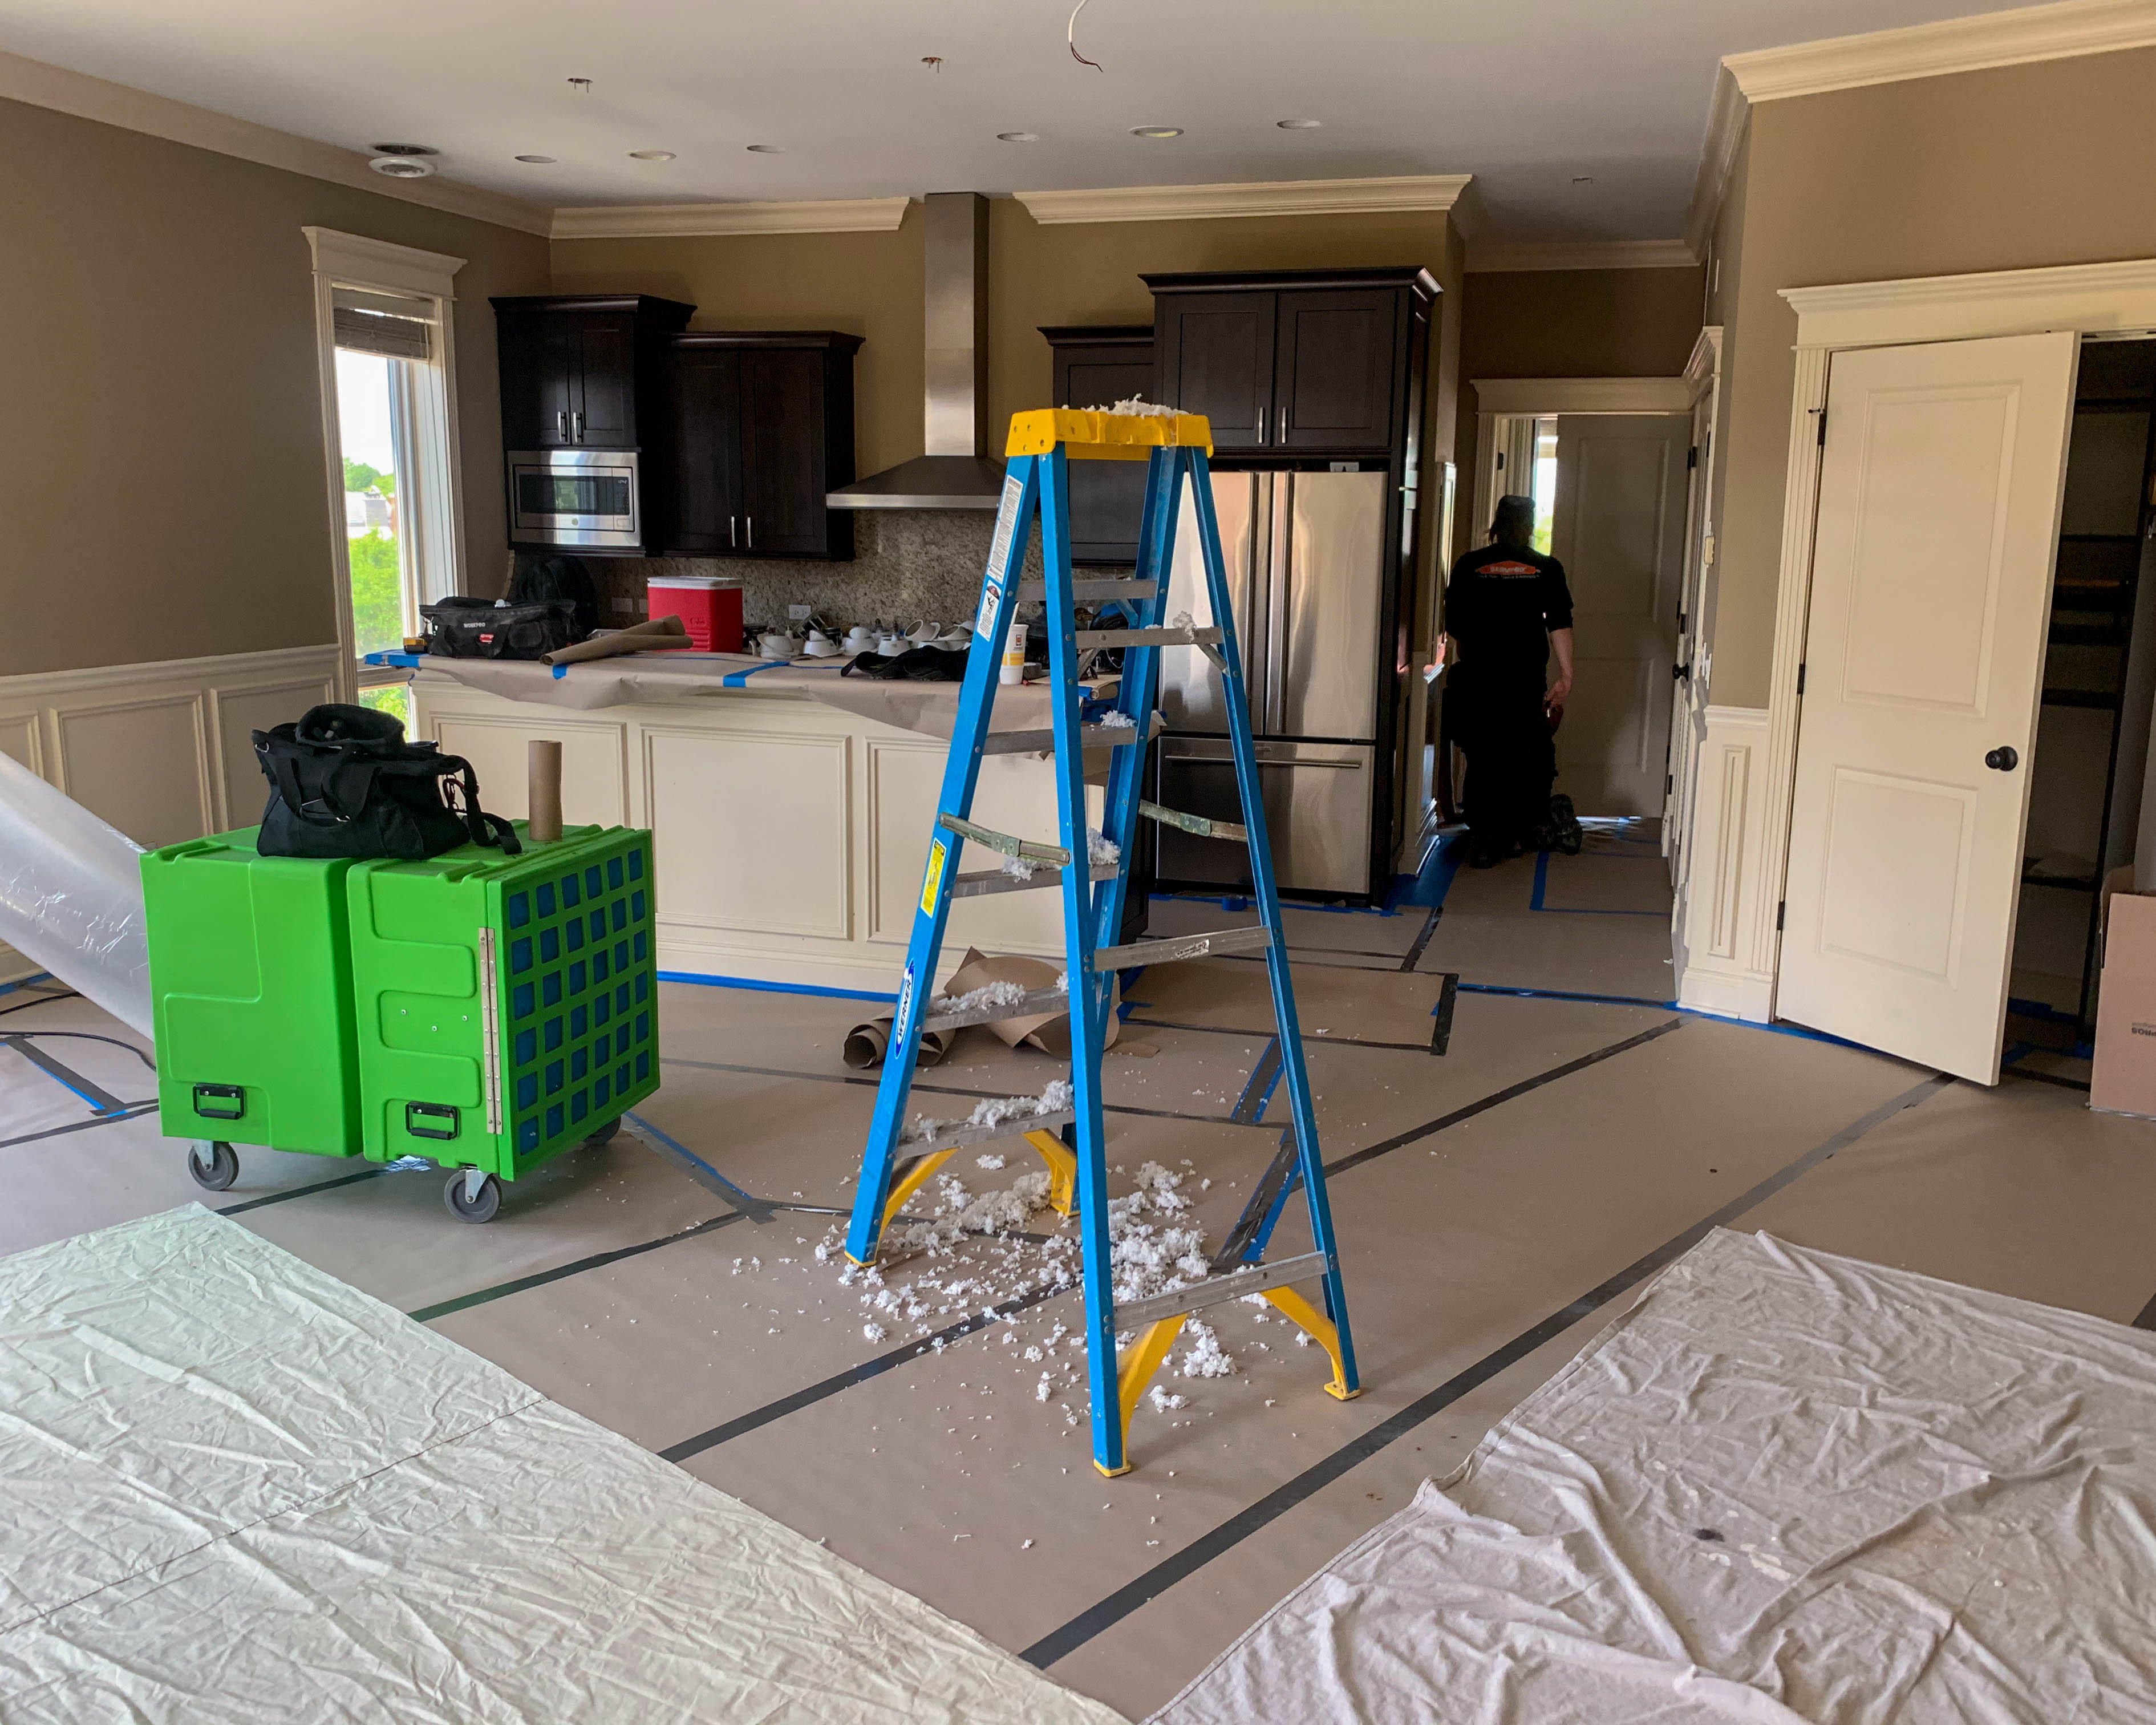 When water damage happens, you need to get the job done right. SERVPRO of Central Schaumburg/ West Bloomingdale is ready to help.